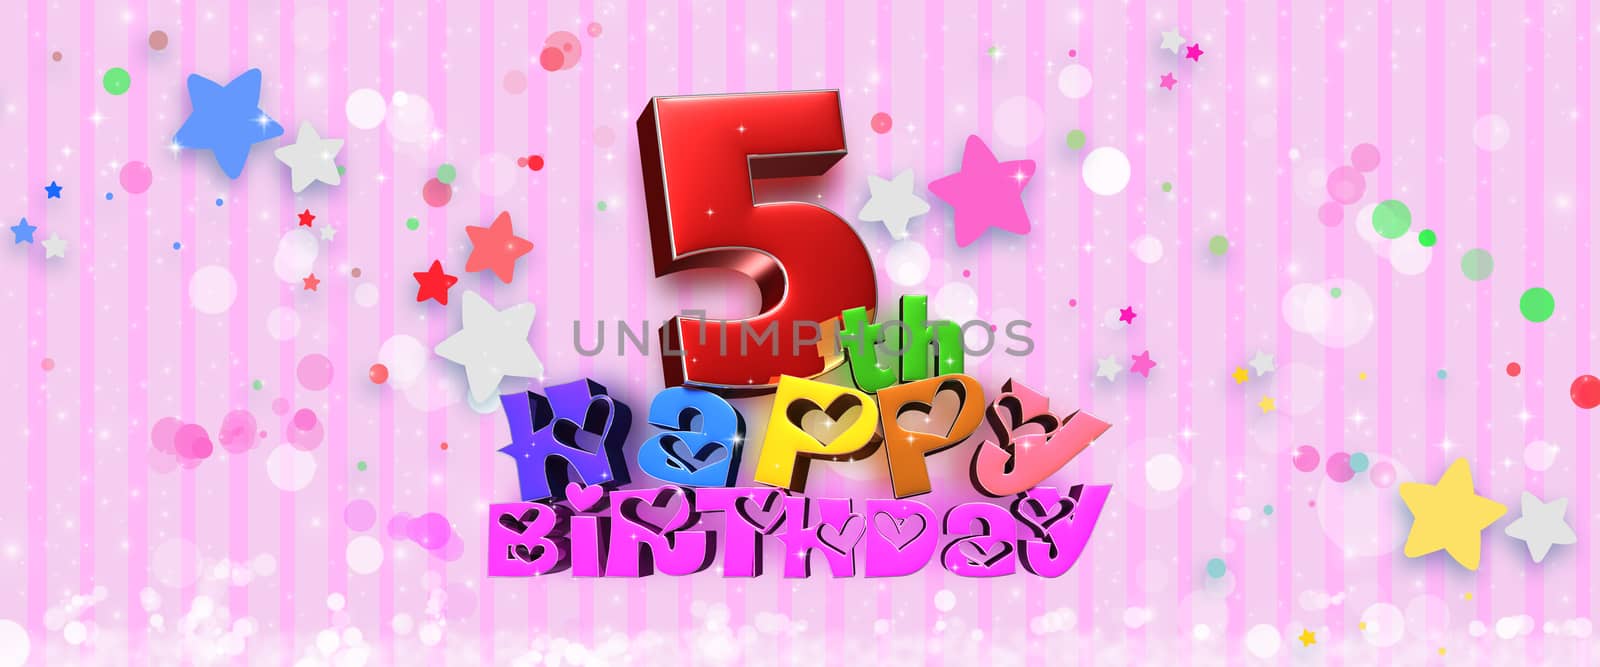 Anniversary Happy Birthday 5 th colorful 3d illustration on pink background.